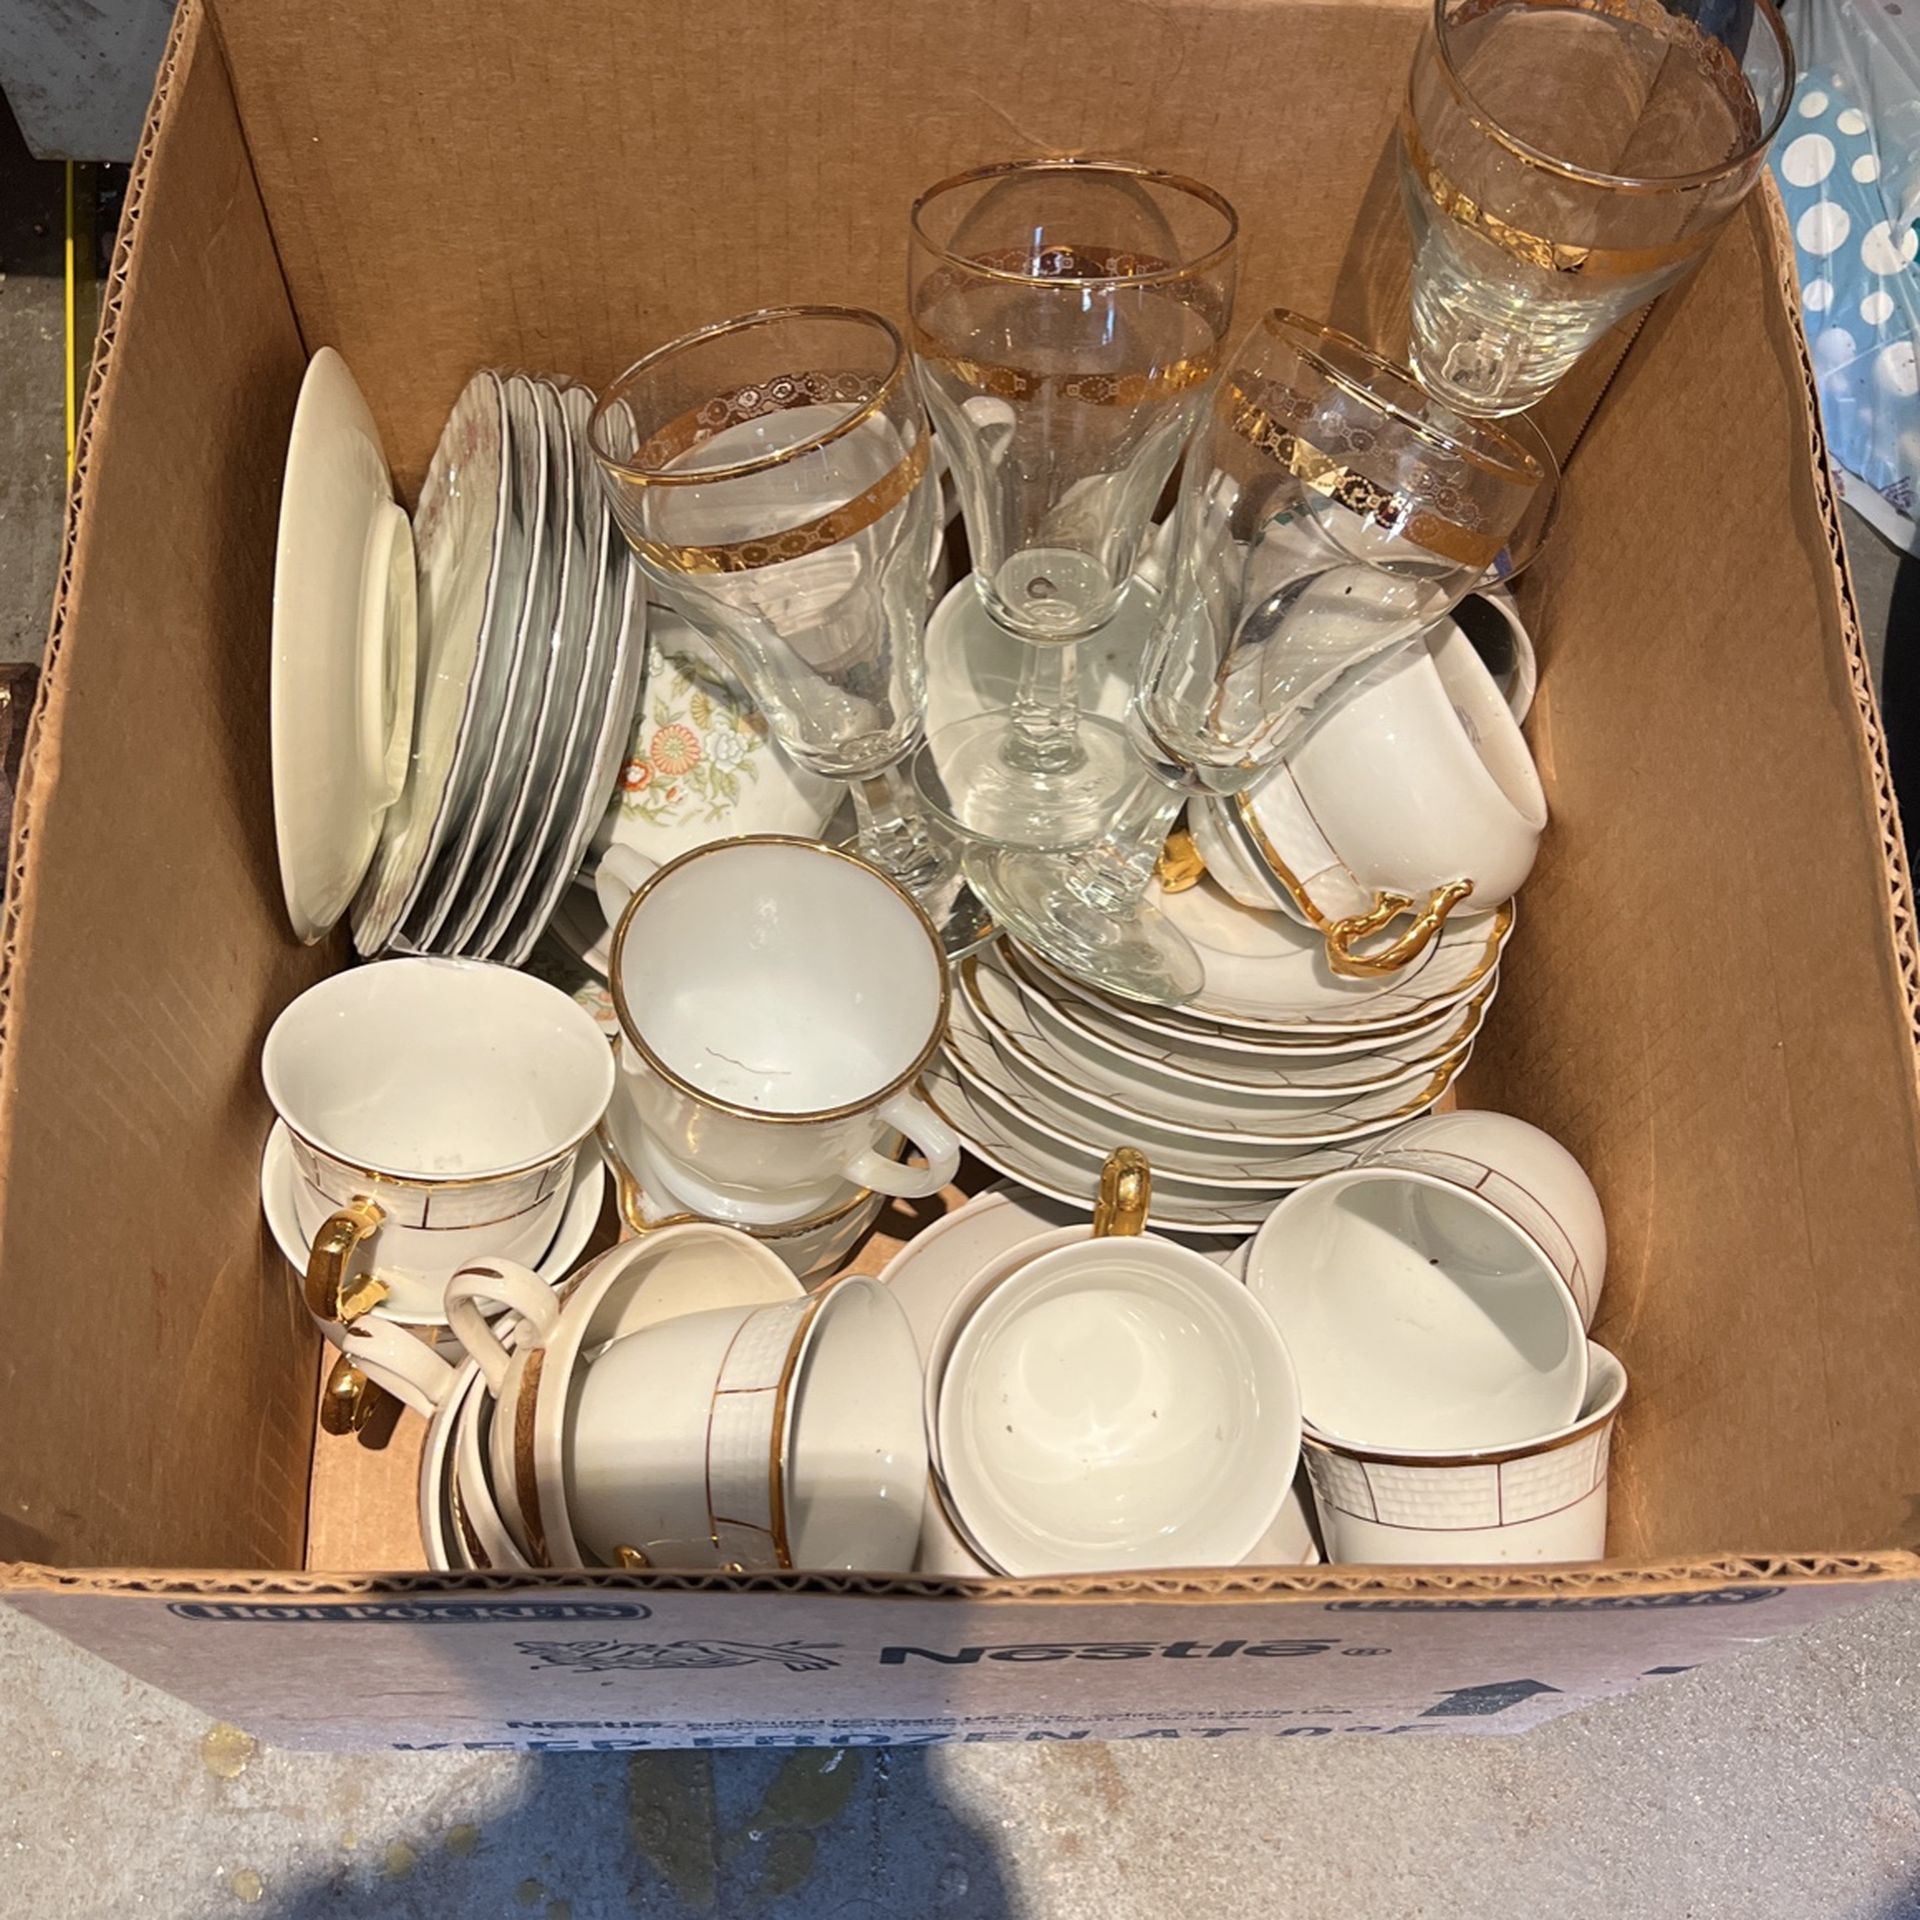 Vintage Gold Plated Cups And Plates